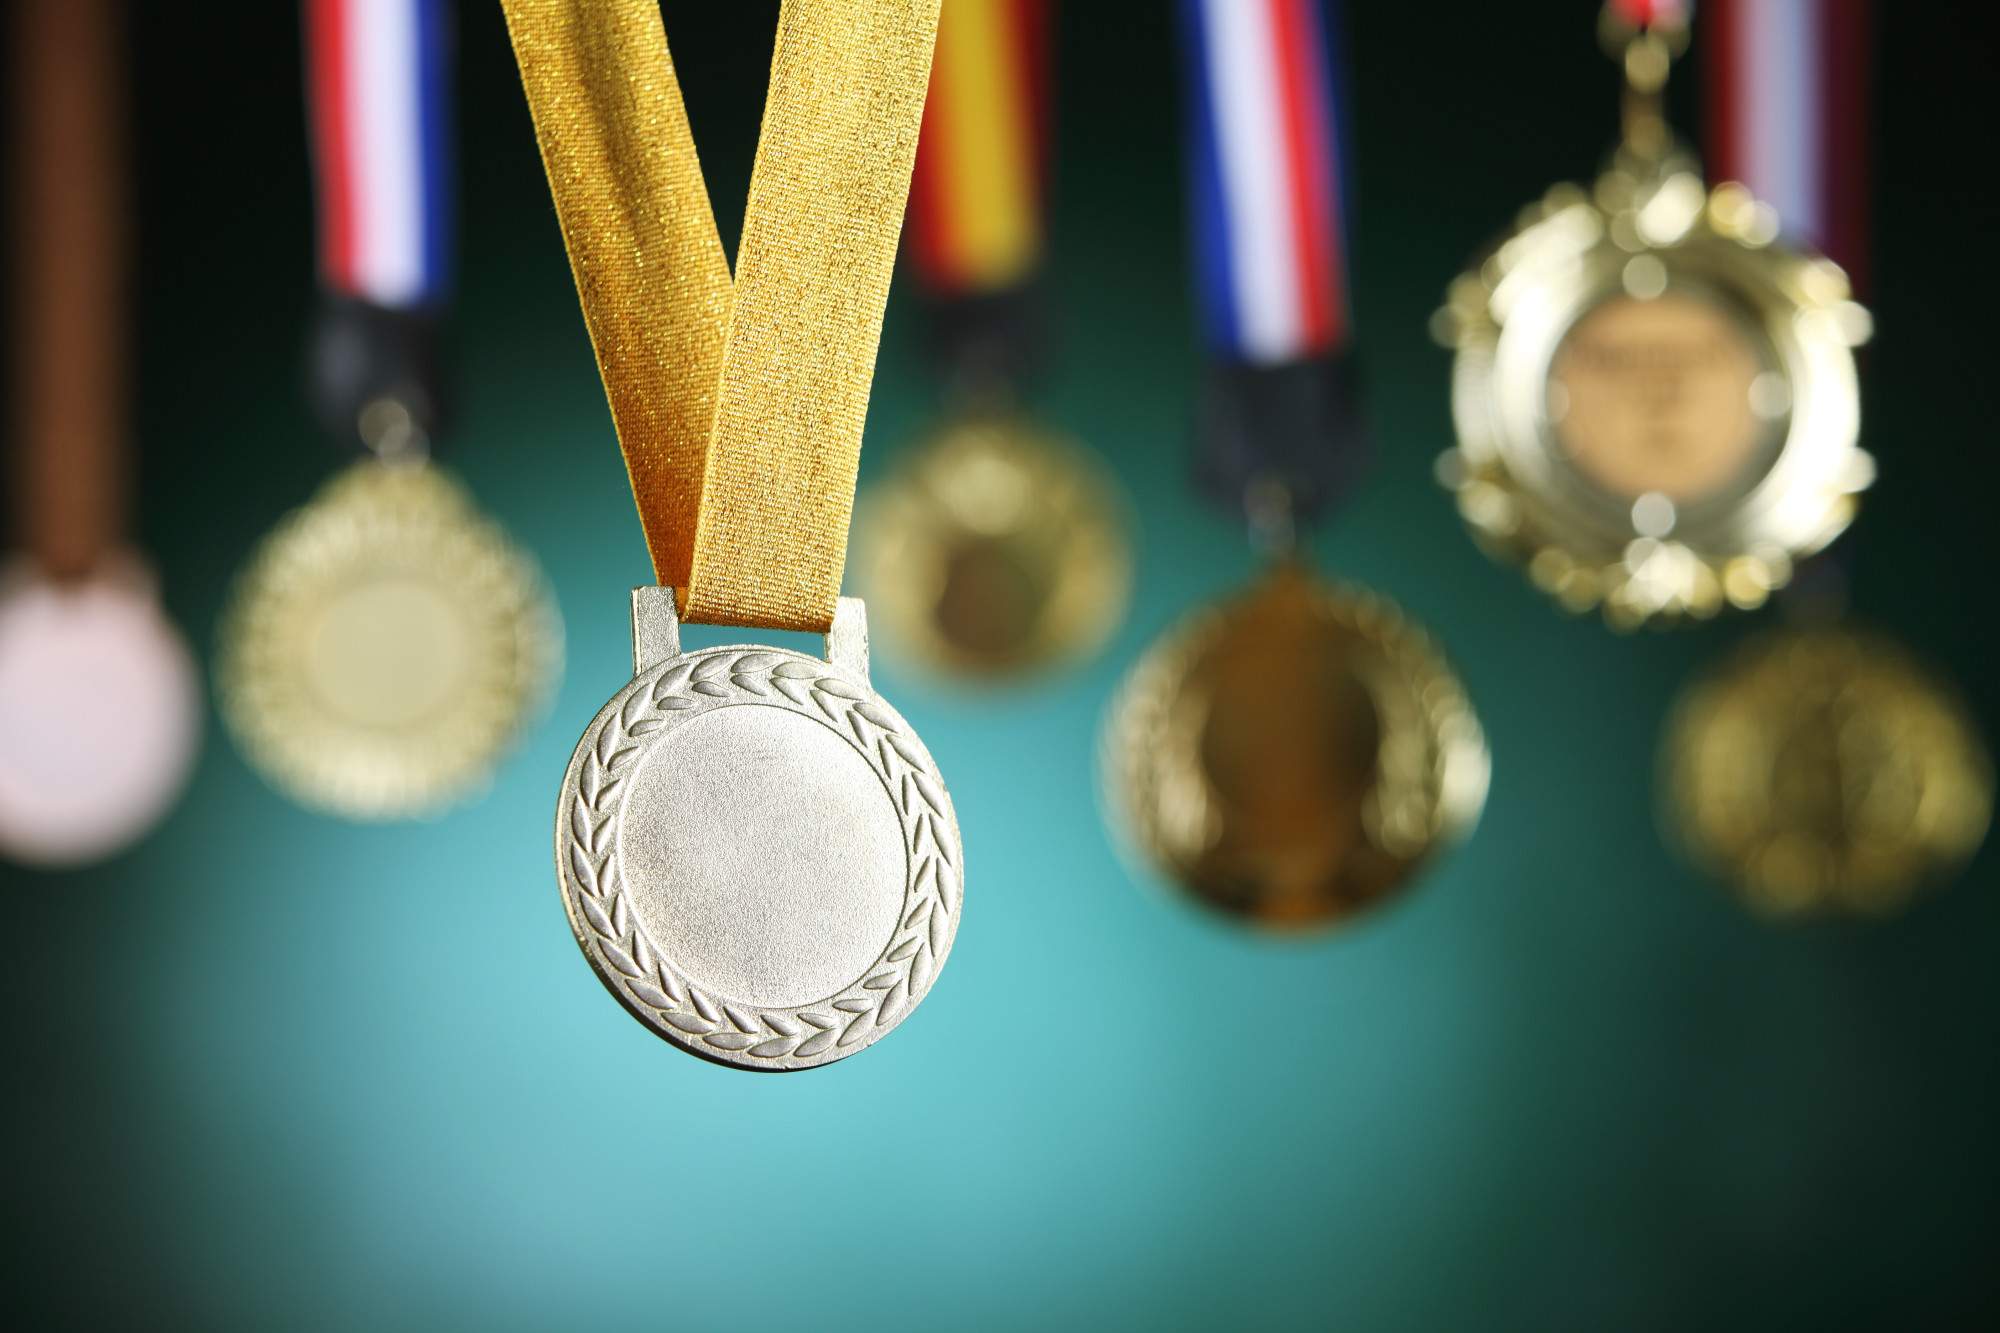 What the Medal Manufacturing Process Actually Looks Like in Practice